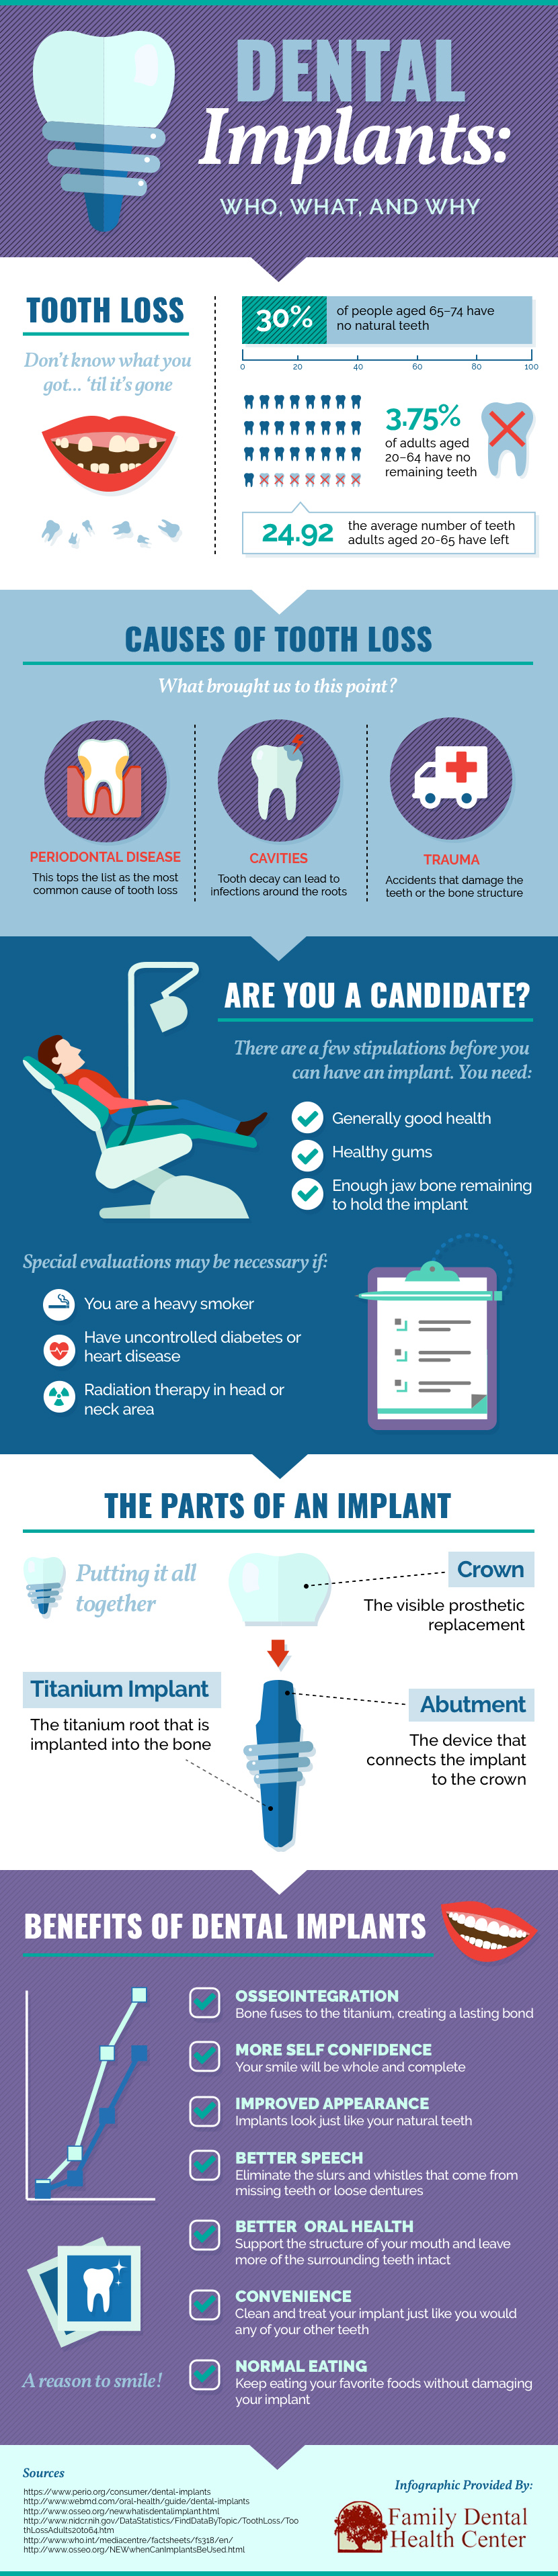 DentalImplants-WhoWhatWhy